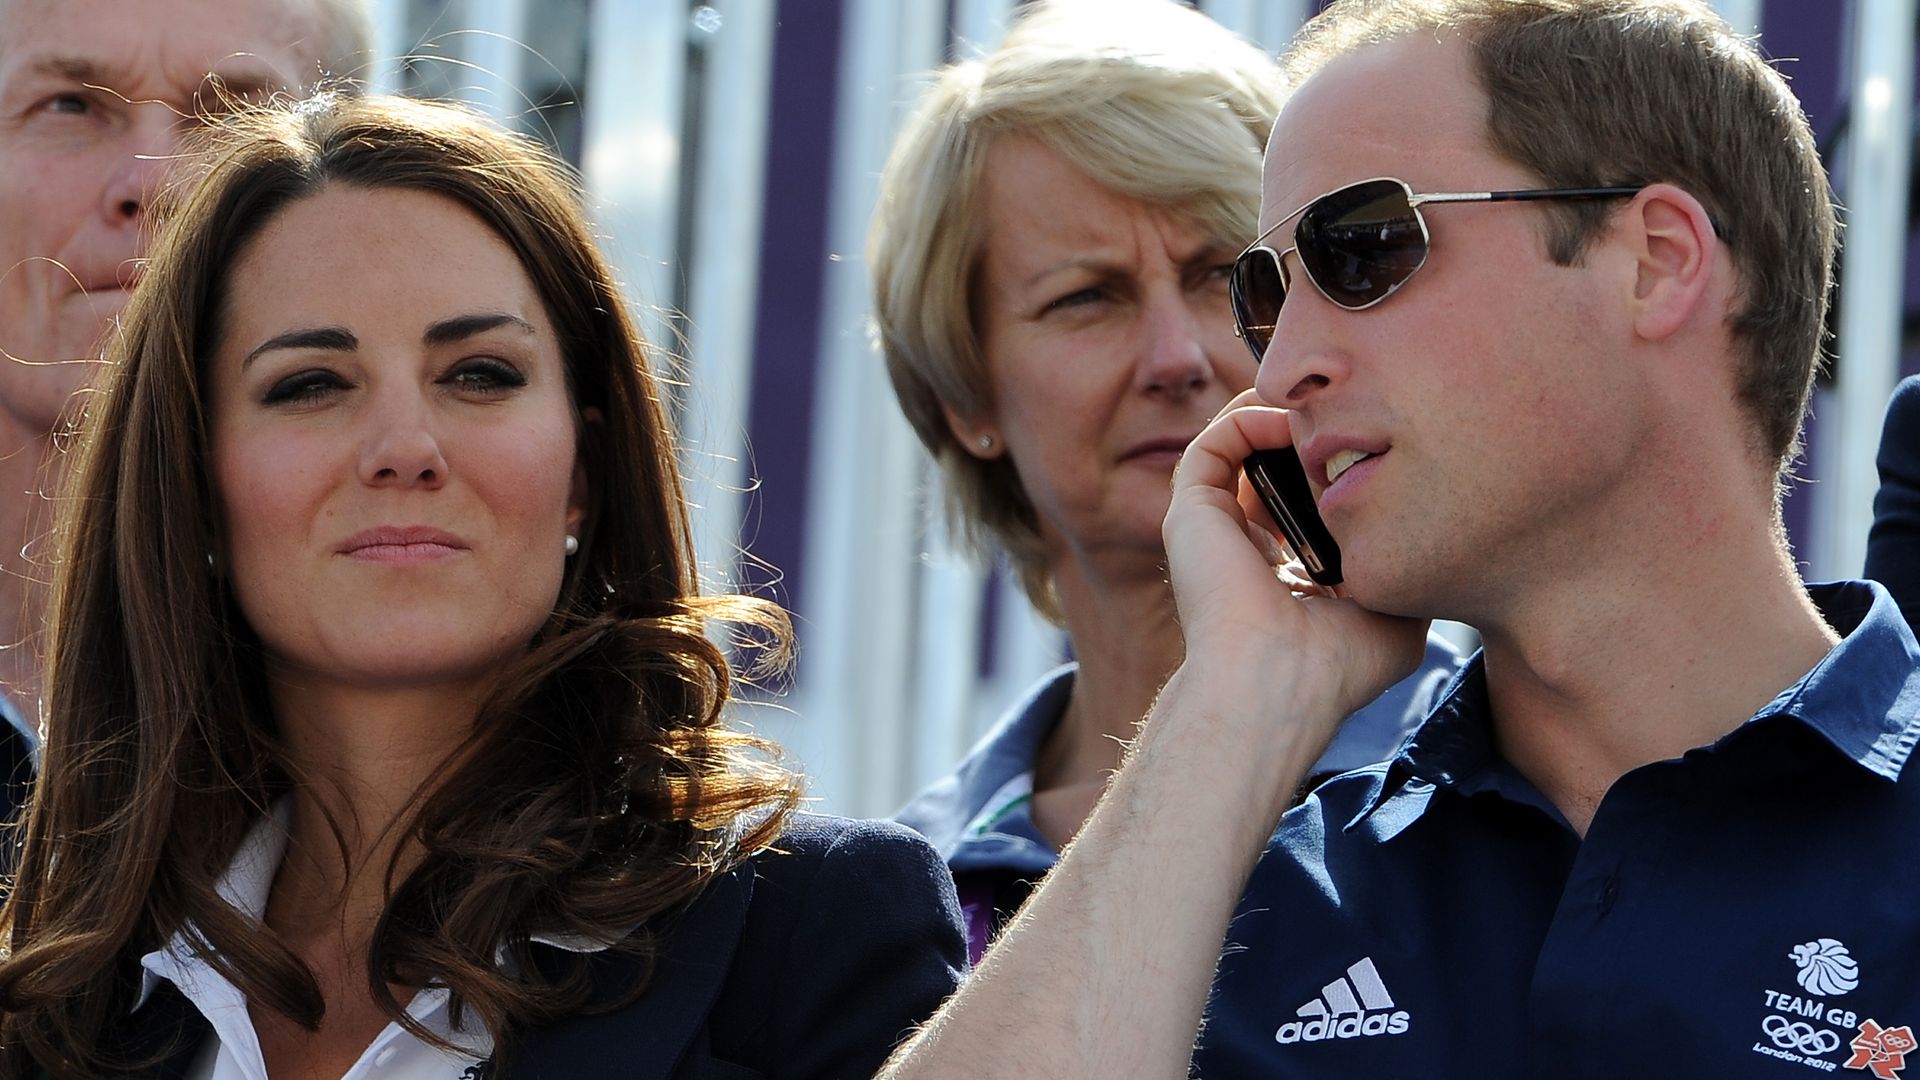 Prince William on the phone next to and Princess Kate